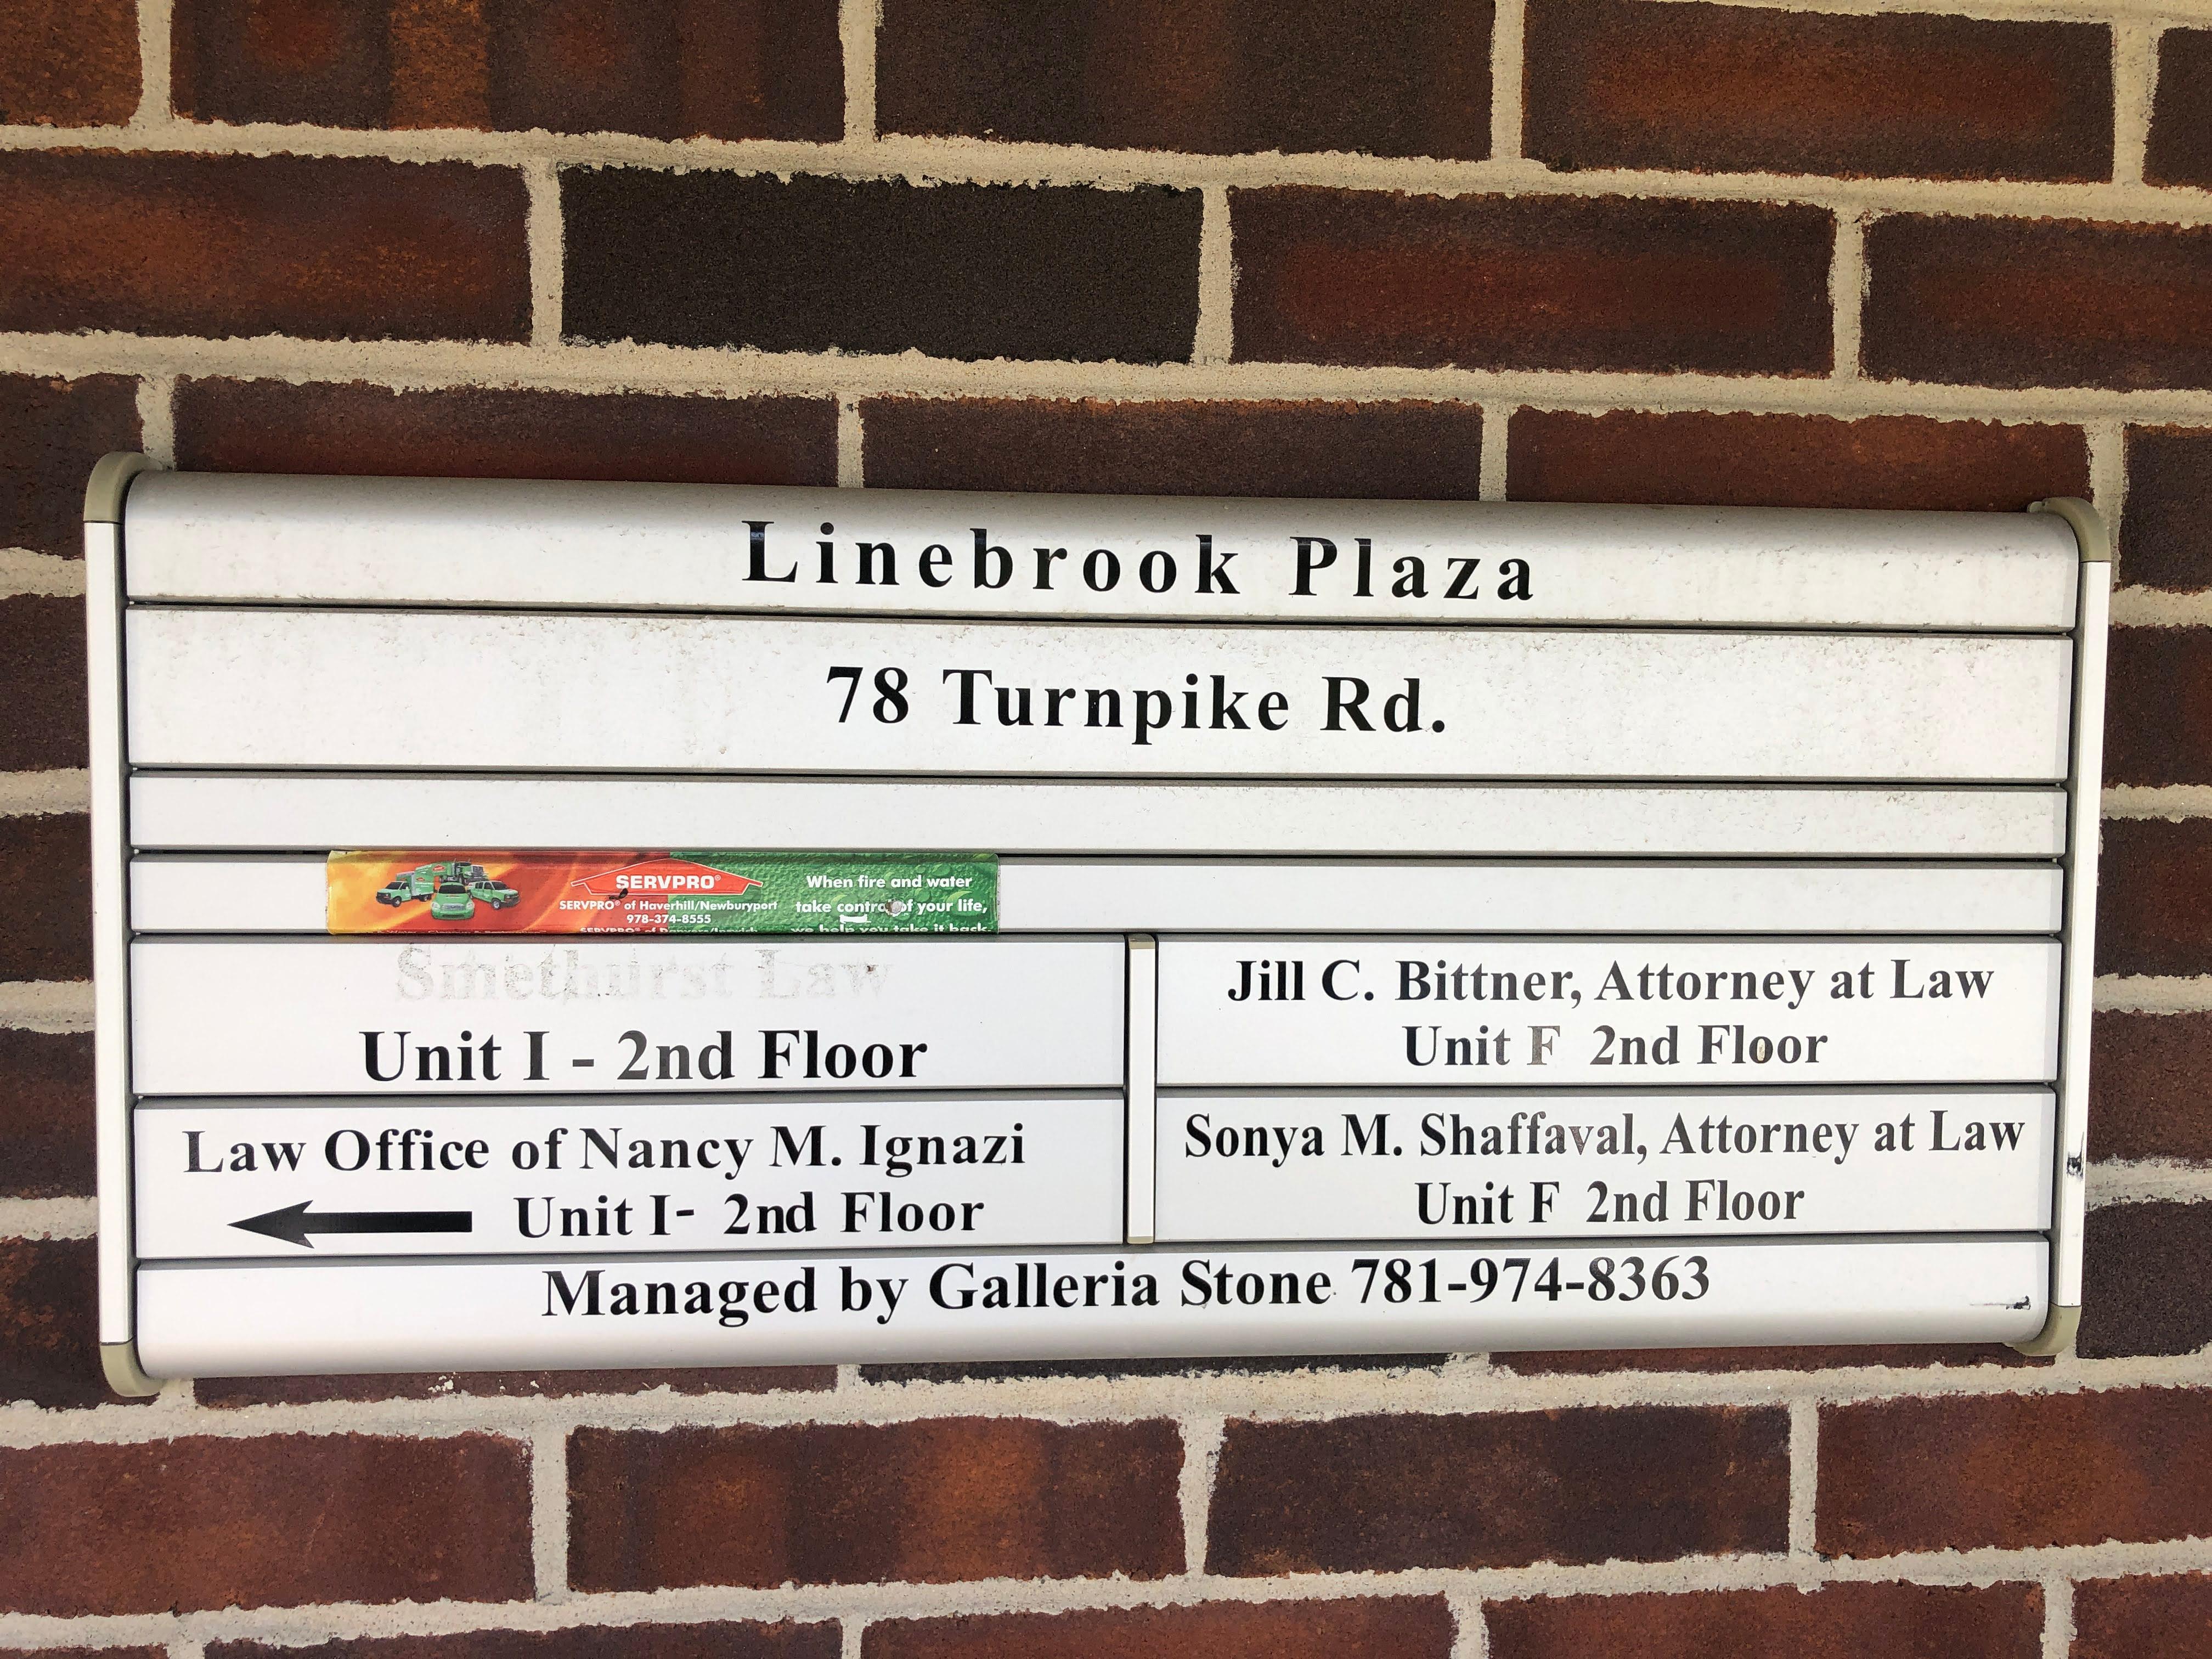 Located on the second floor at 78 Turnpike Road, along Route 1 in Ipswich, Massachusetts.